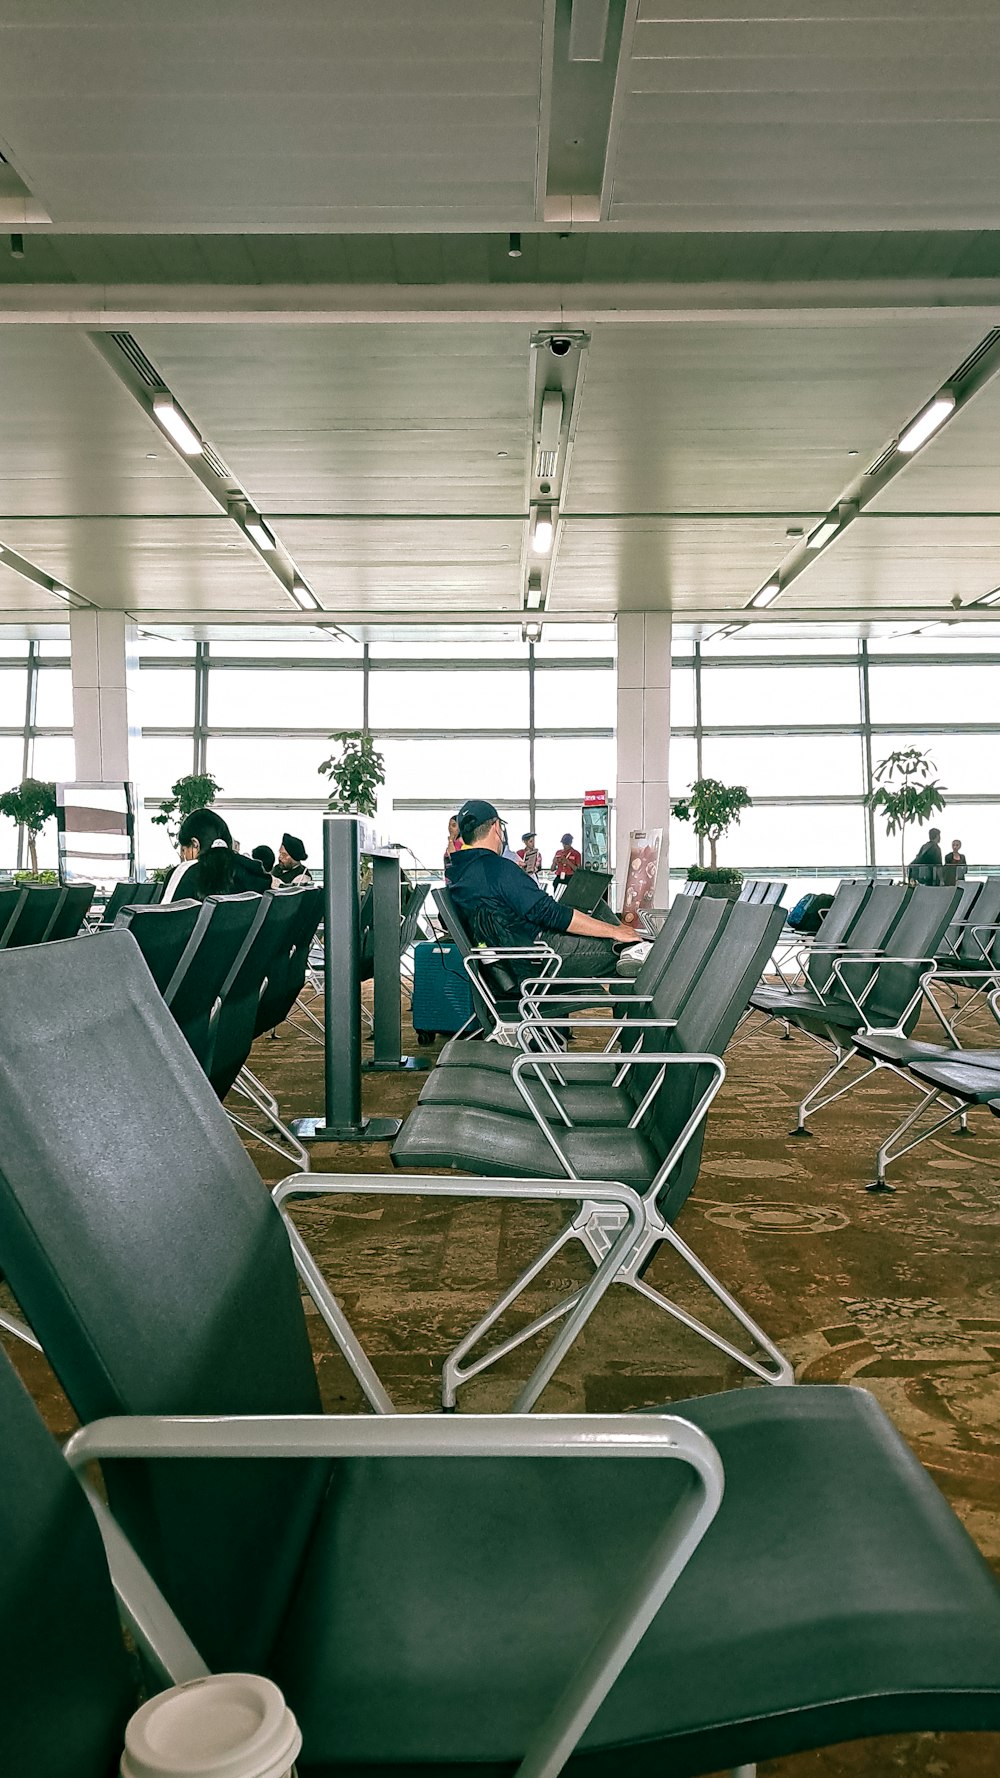 a group of people sitting in chairs in an airport